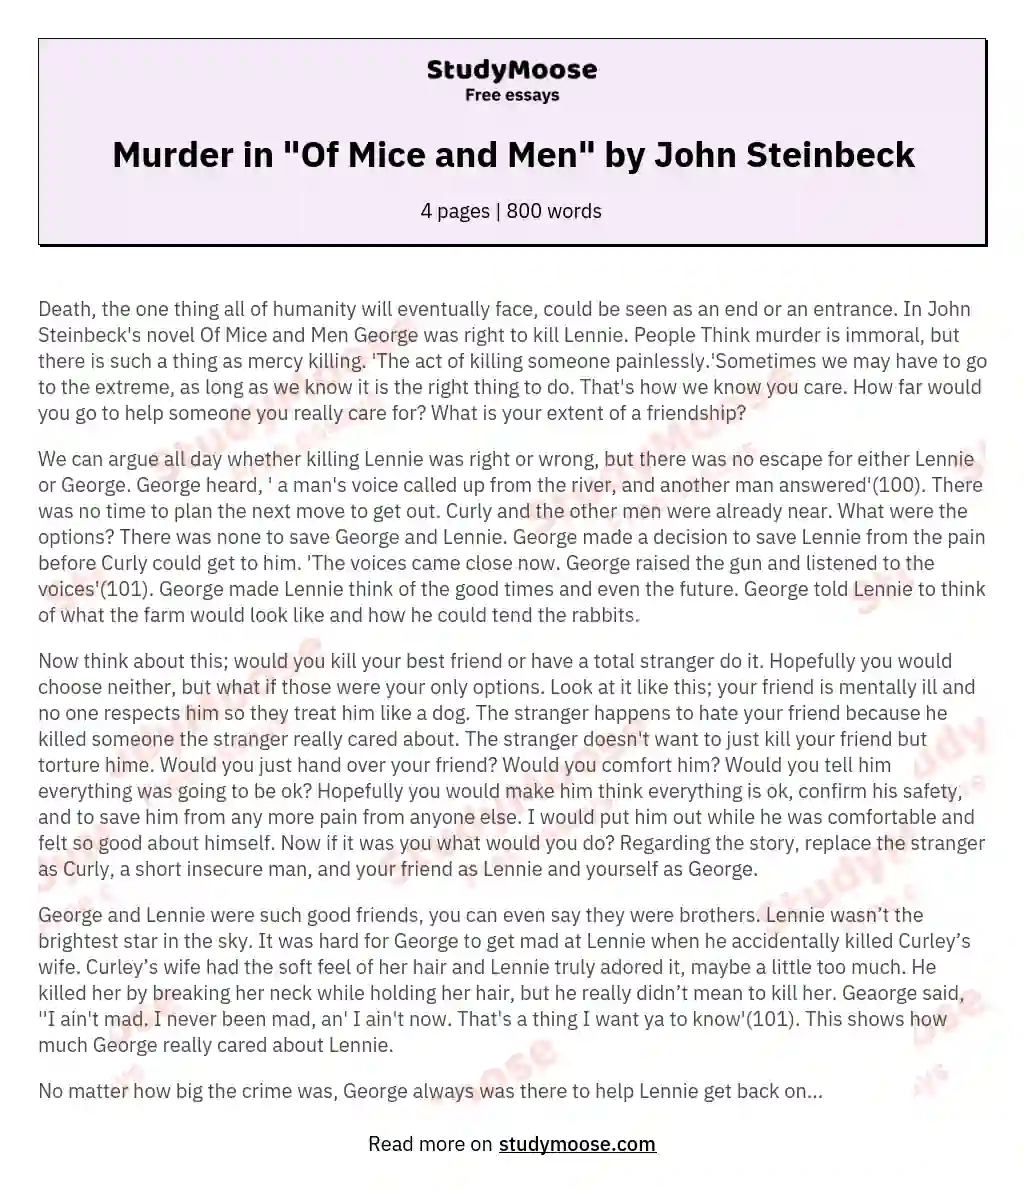 Murder in "Of Mice and Men" by John Steinbeck essay